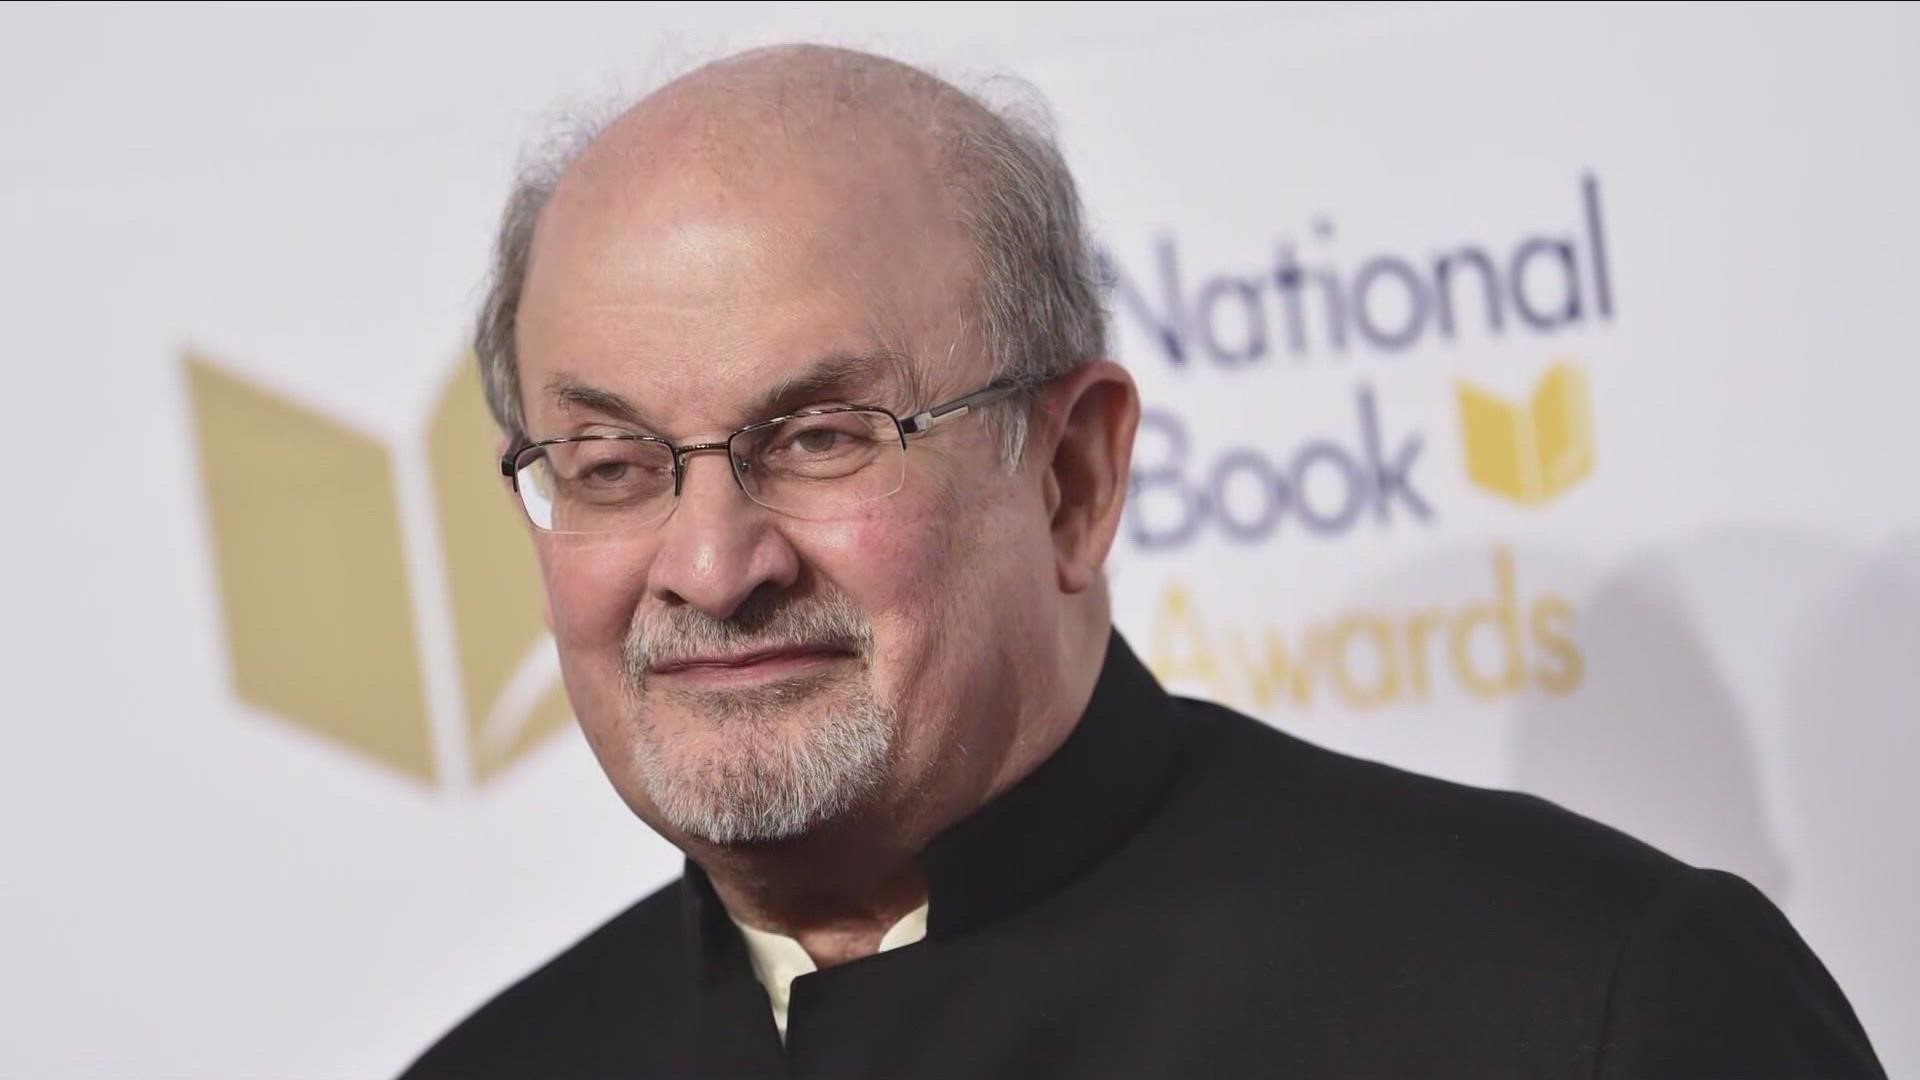 Acclaimed author Salman Rushdie was attacked while making an appearance at the Chautauqua Intuition Friday morning.